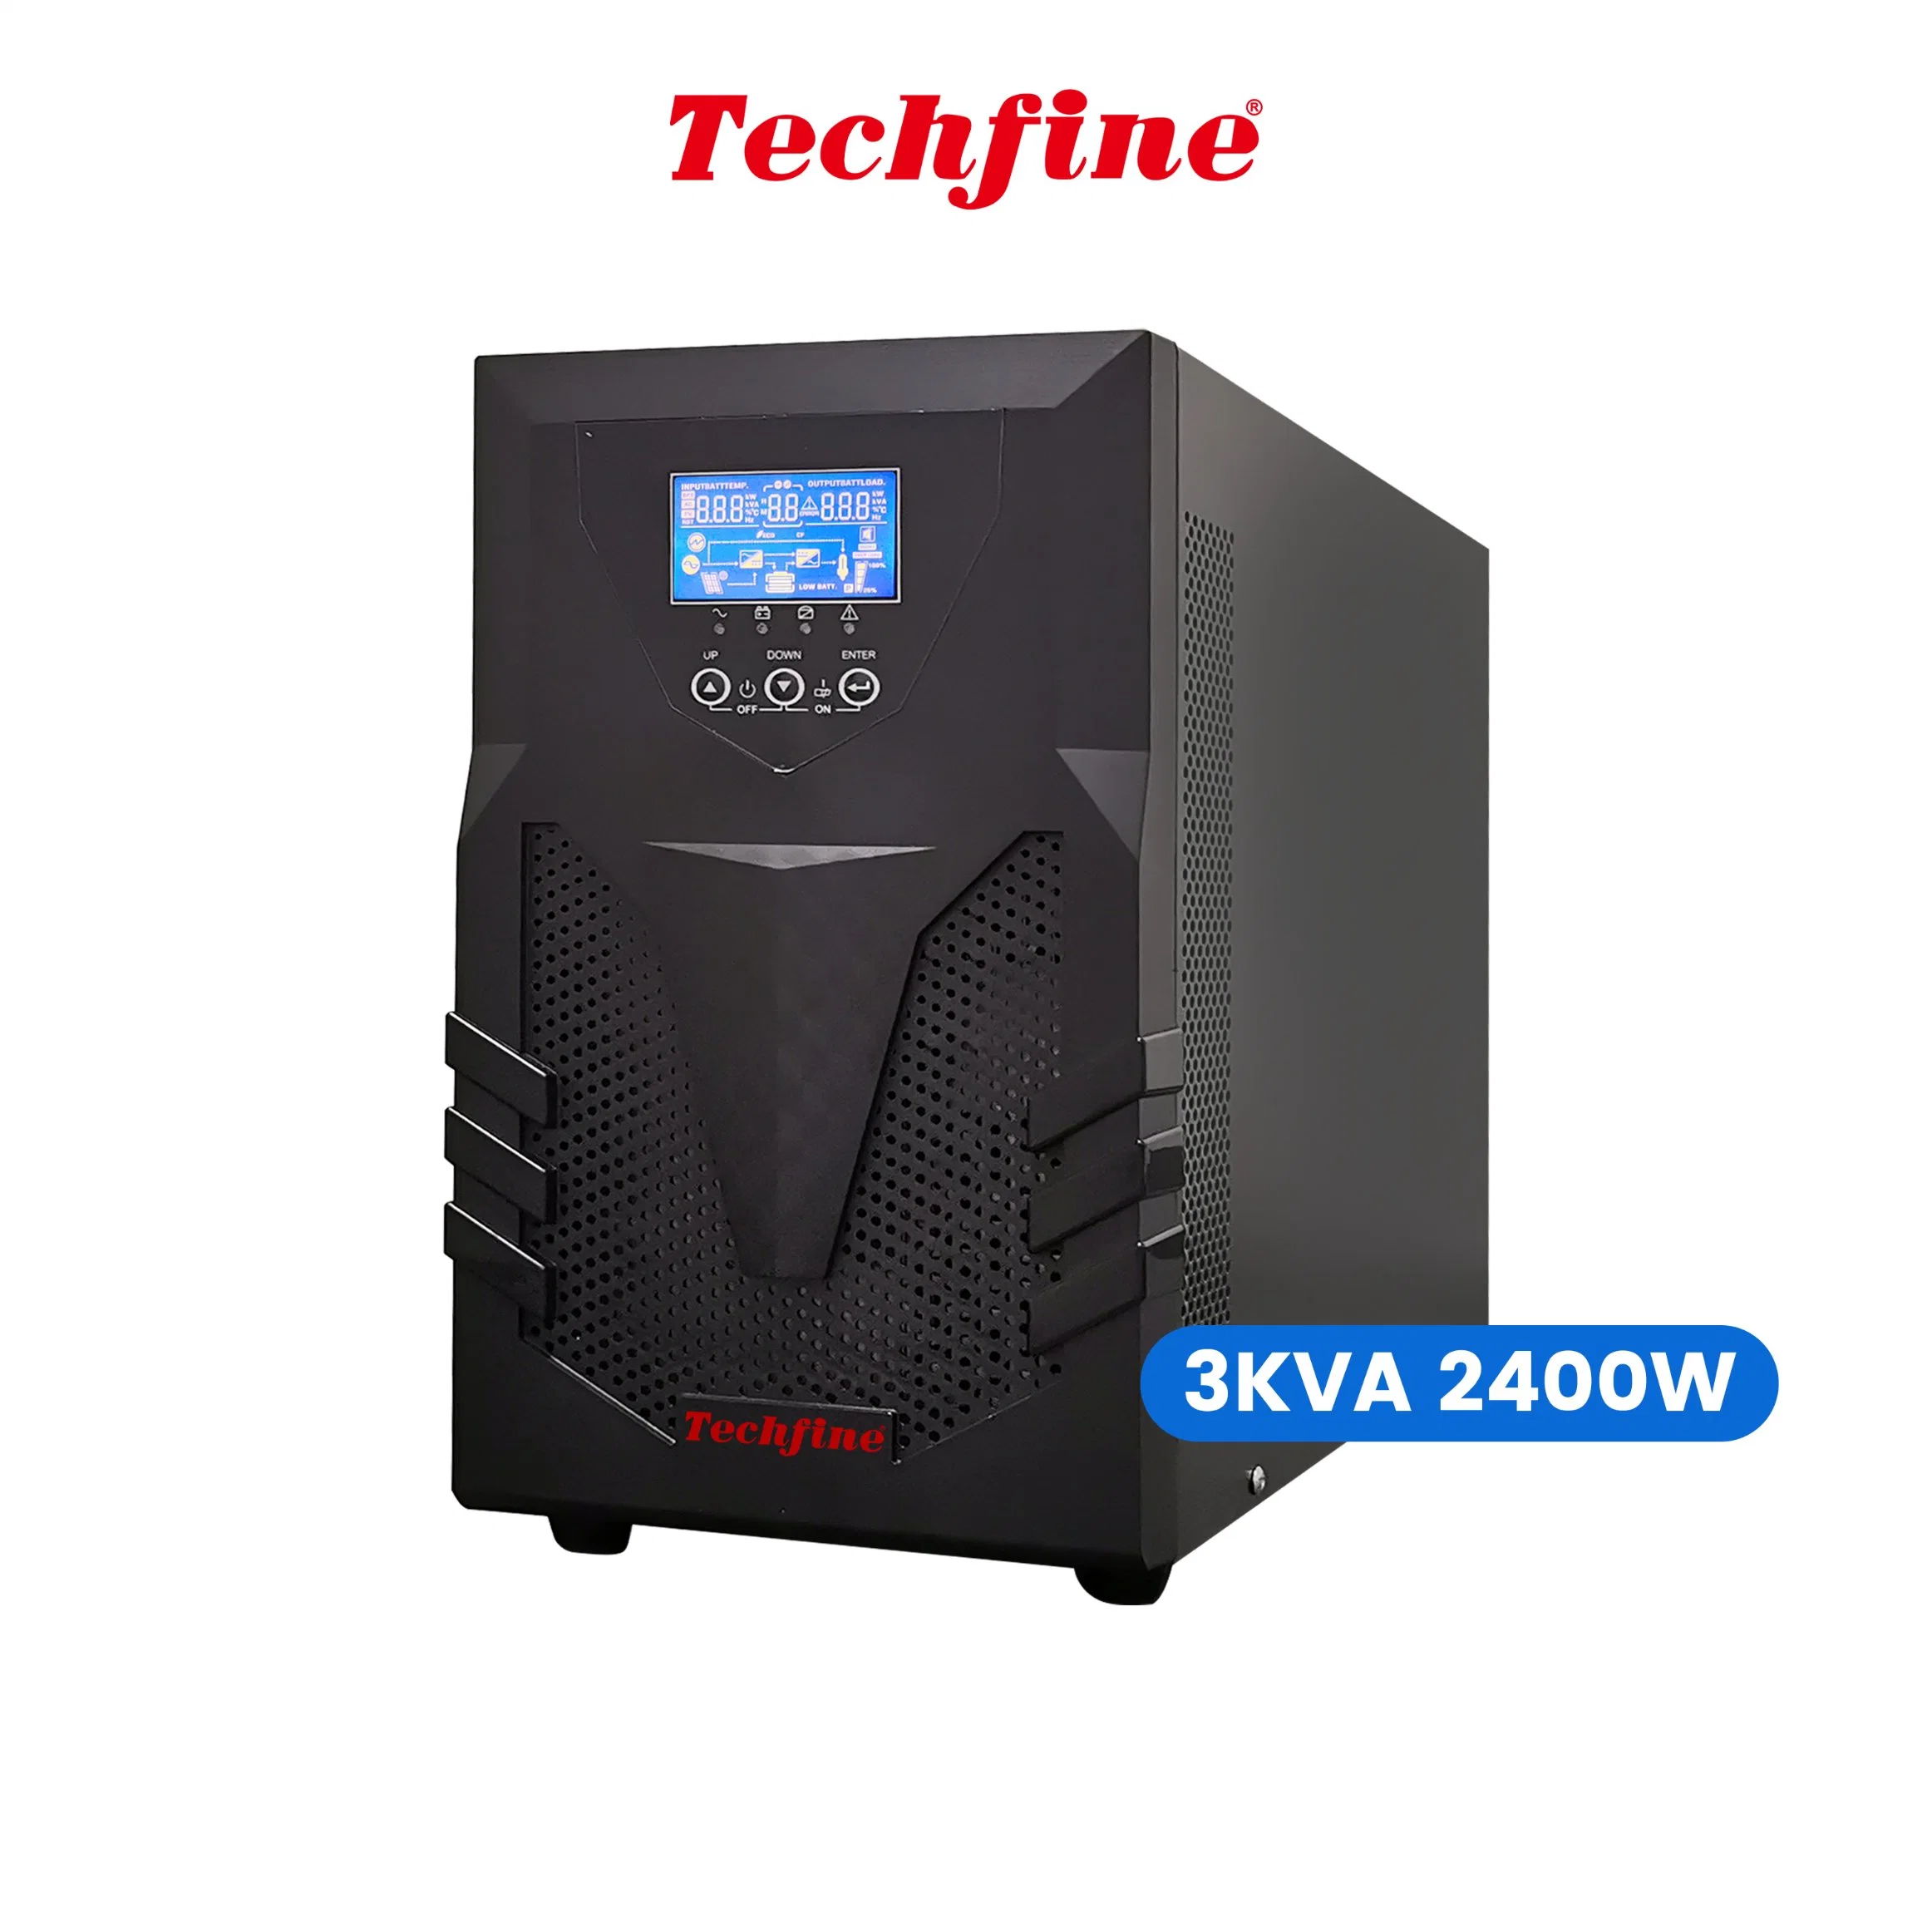 Techfine High Frequency UPS 6kVA 4800W Online UPS Built in Battery Pure Home Power Supply UPS